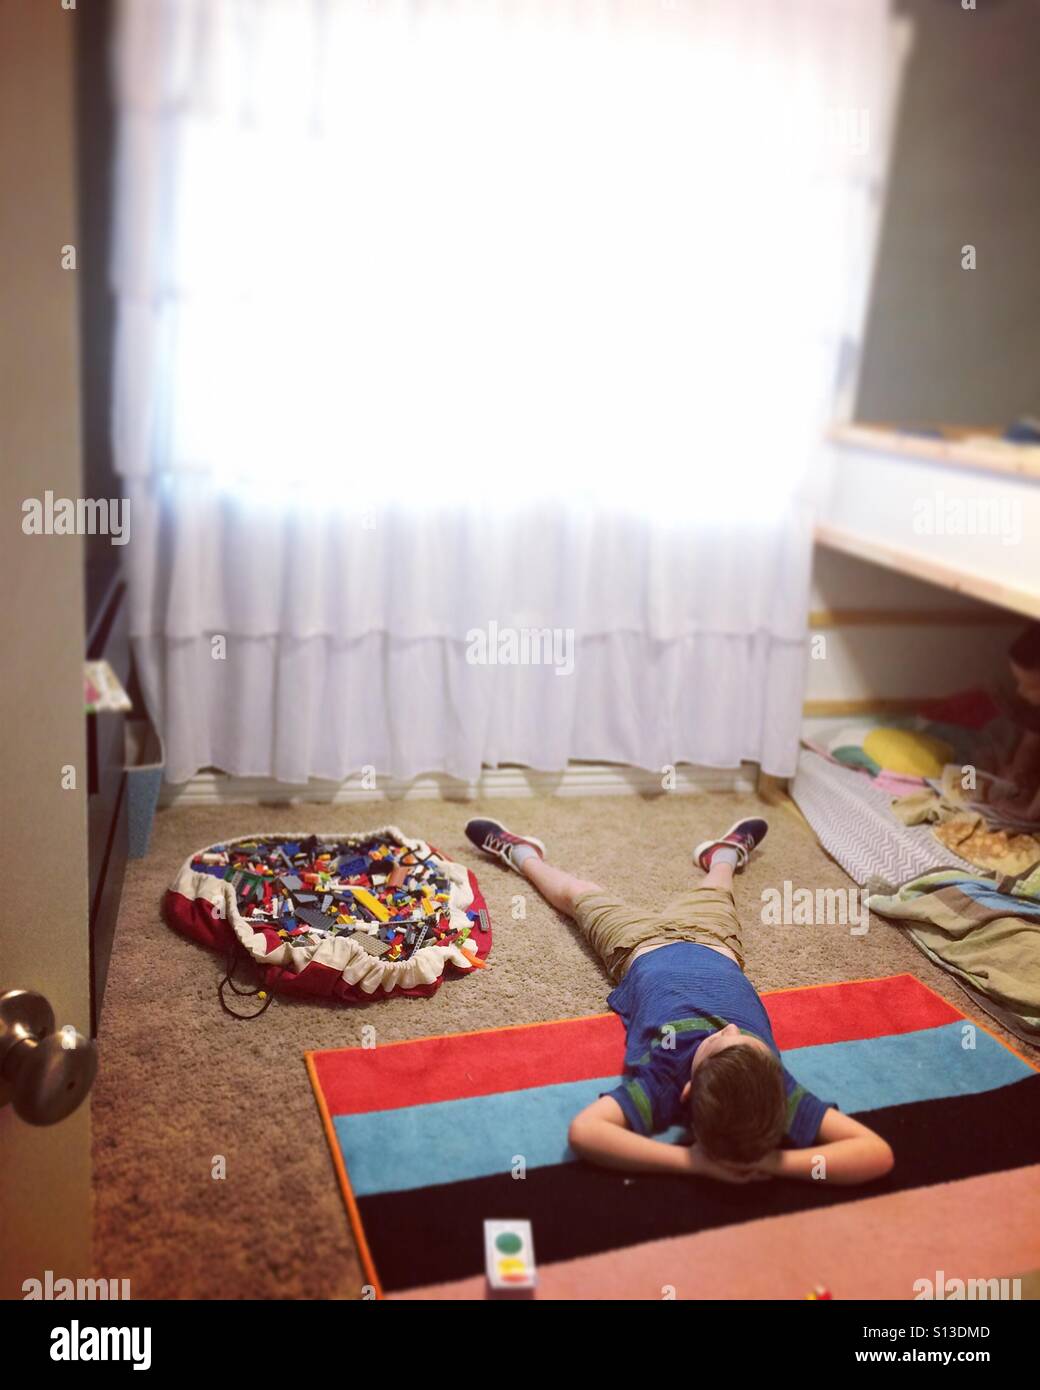 Boy lying on a colorful rug in a bedroom Stock Photo